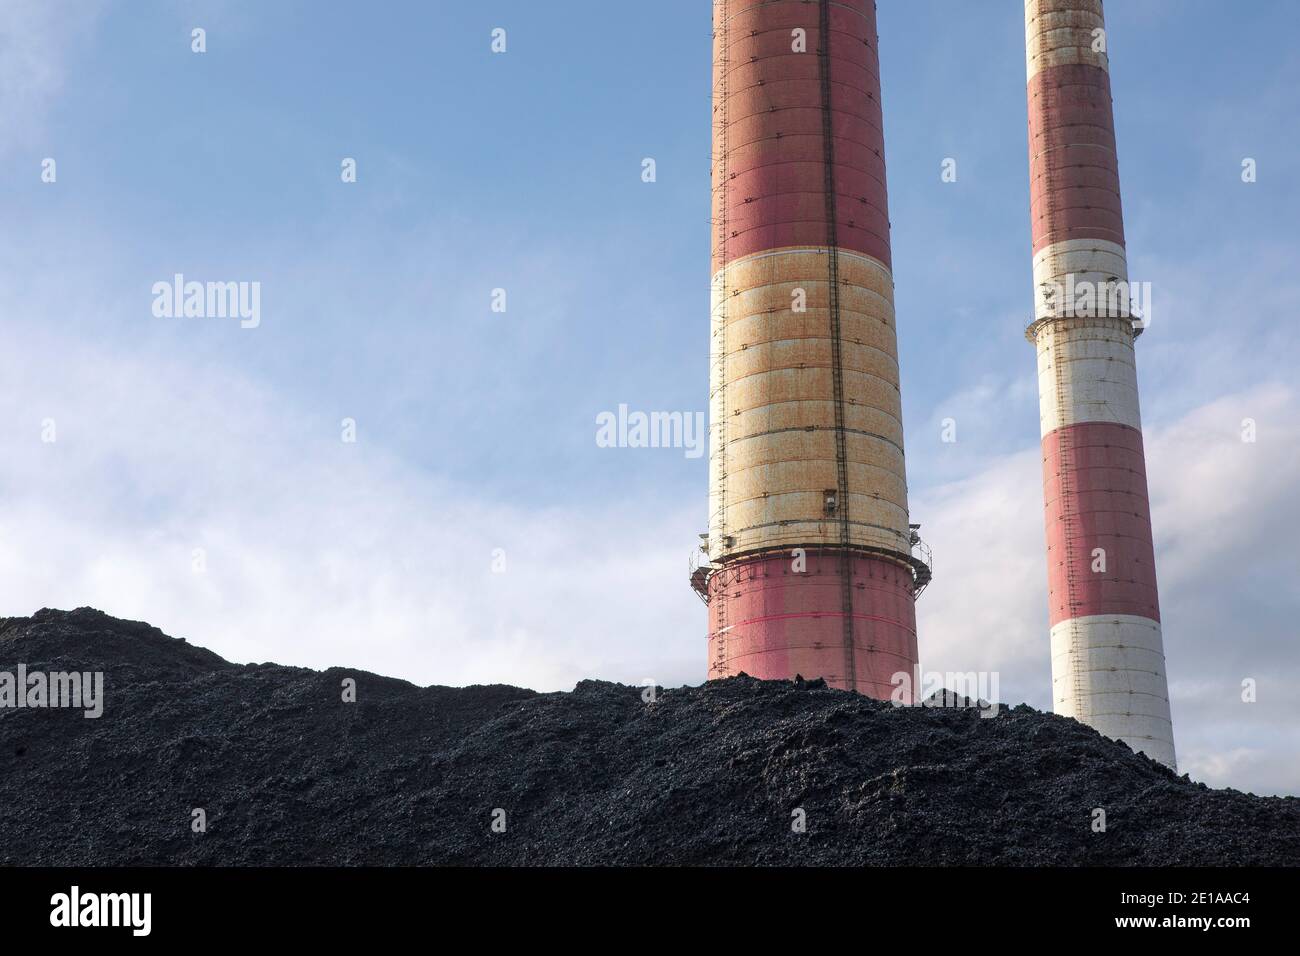 Coal heap, natural black coal with industrial chimneys. Industrial background. Global warming, CO2 emission, coal energy issues, energy from fossil fu Stock Photo